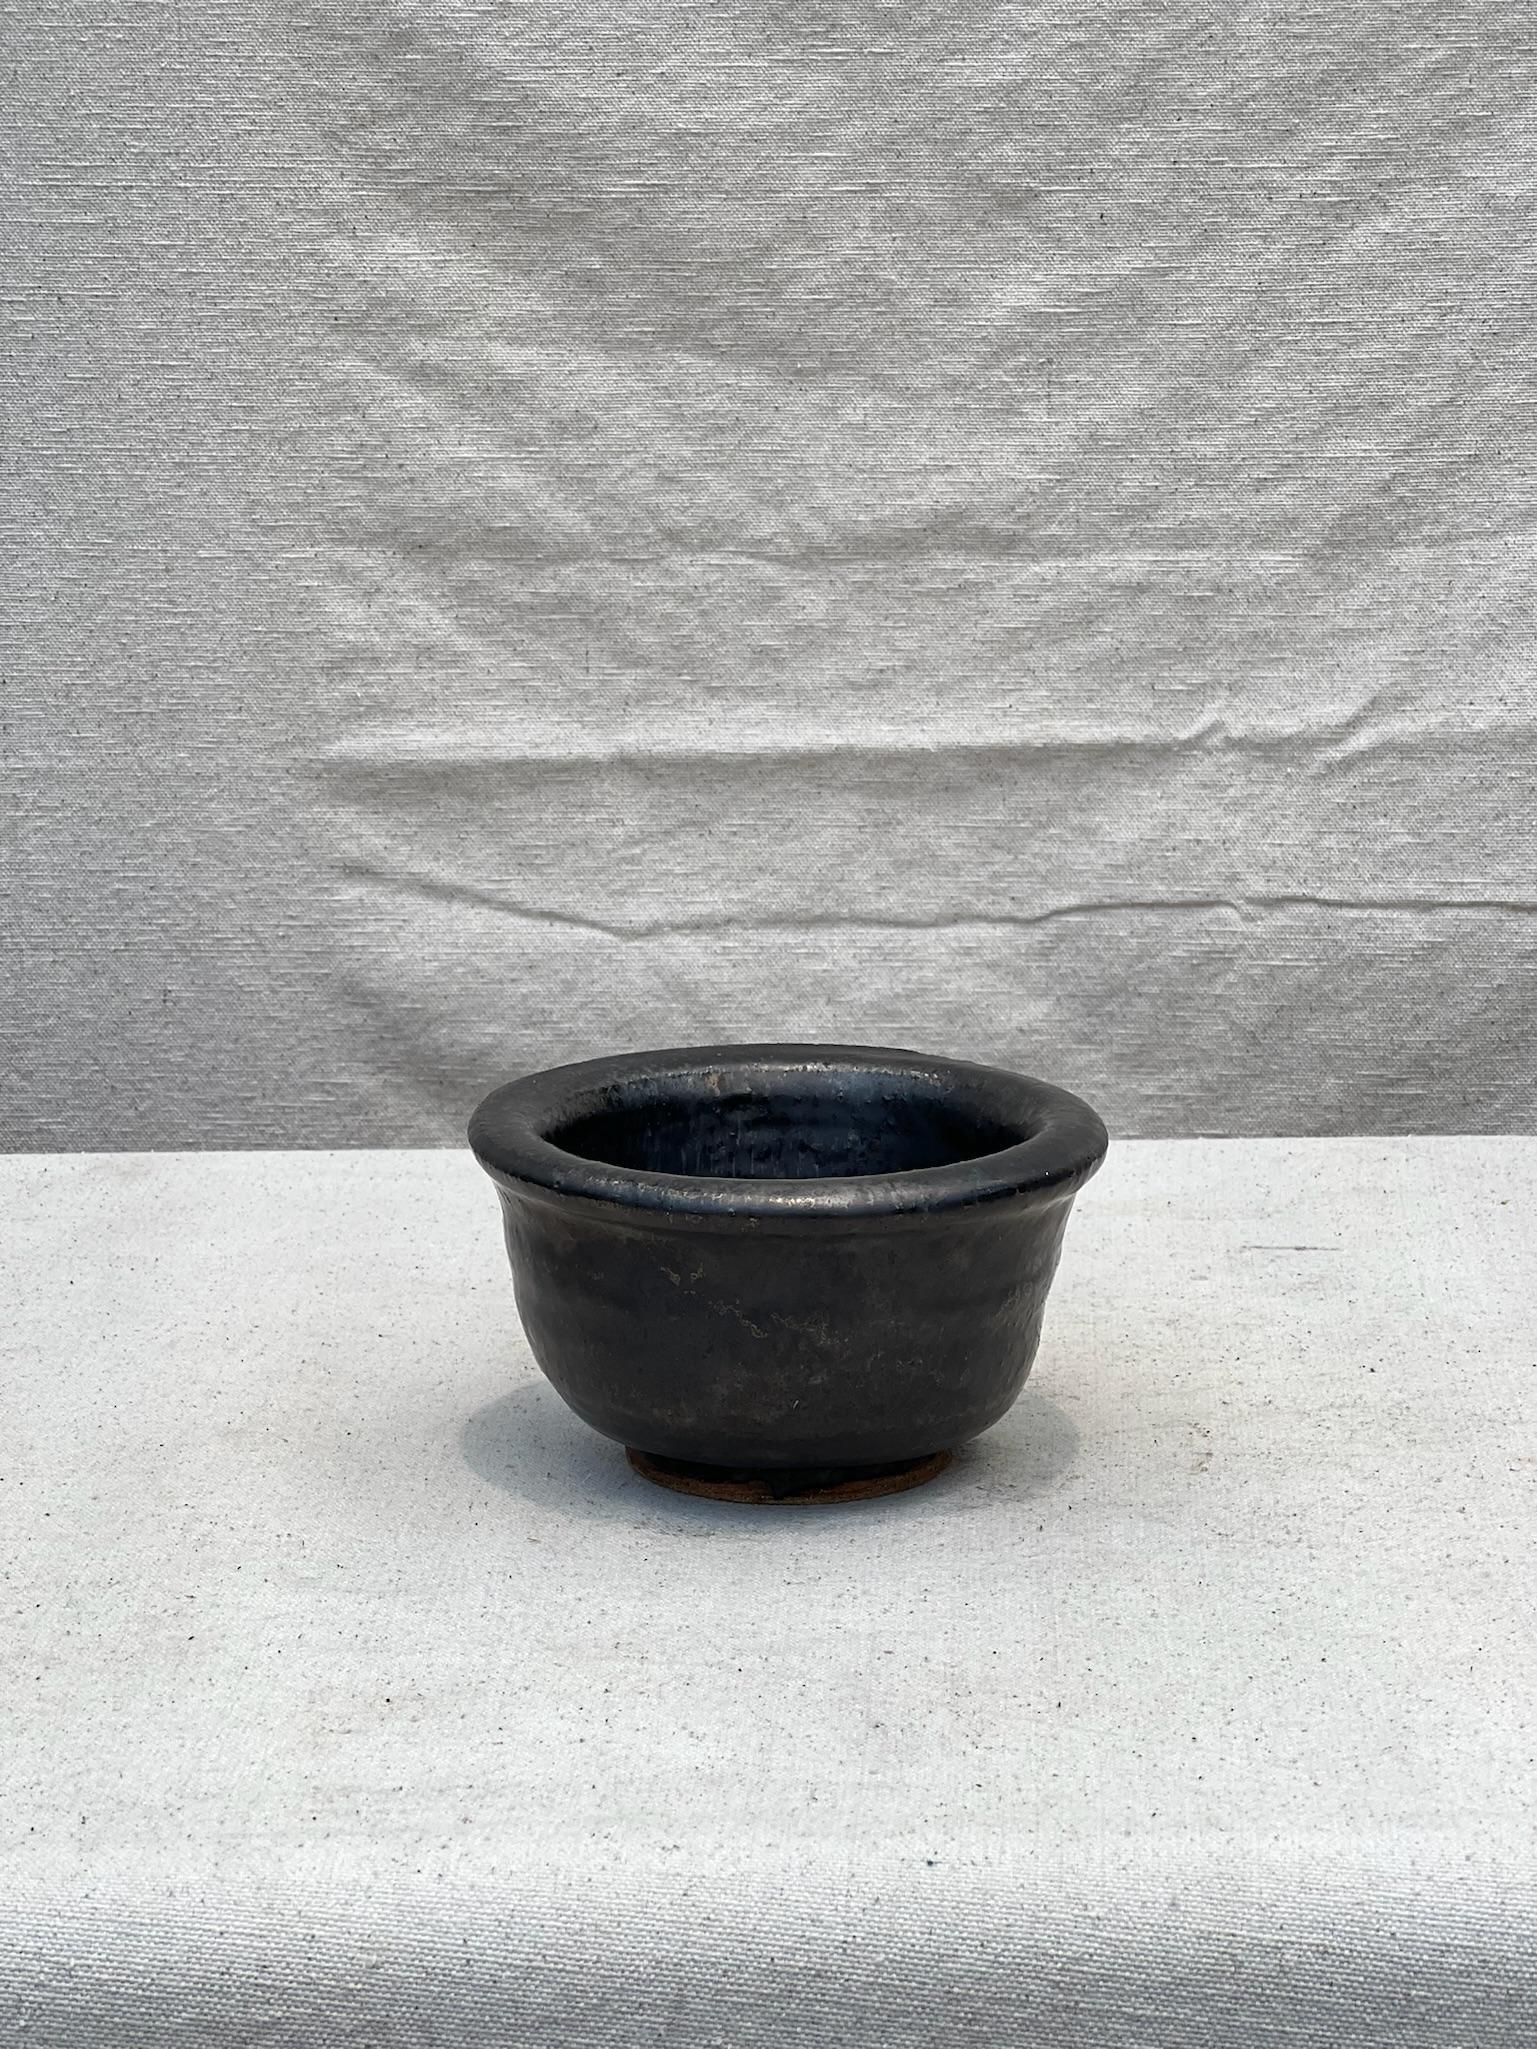 Exquisite small black vintage Asian bowl in timeless black – collectible décor piece.